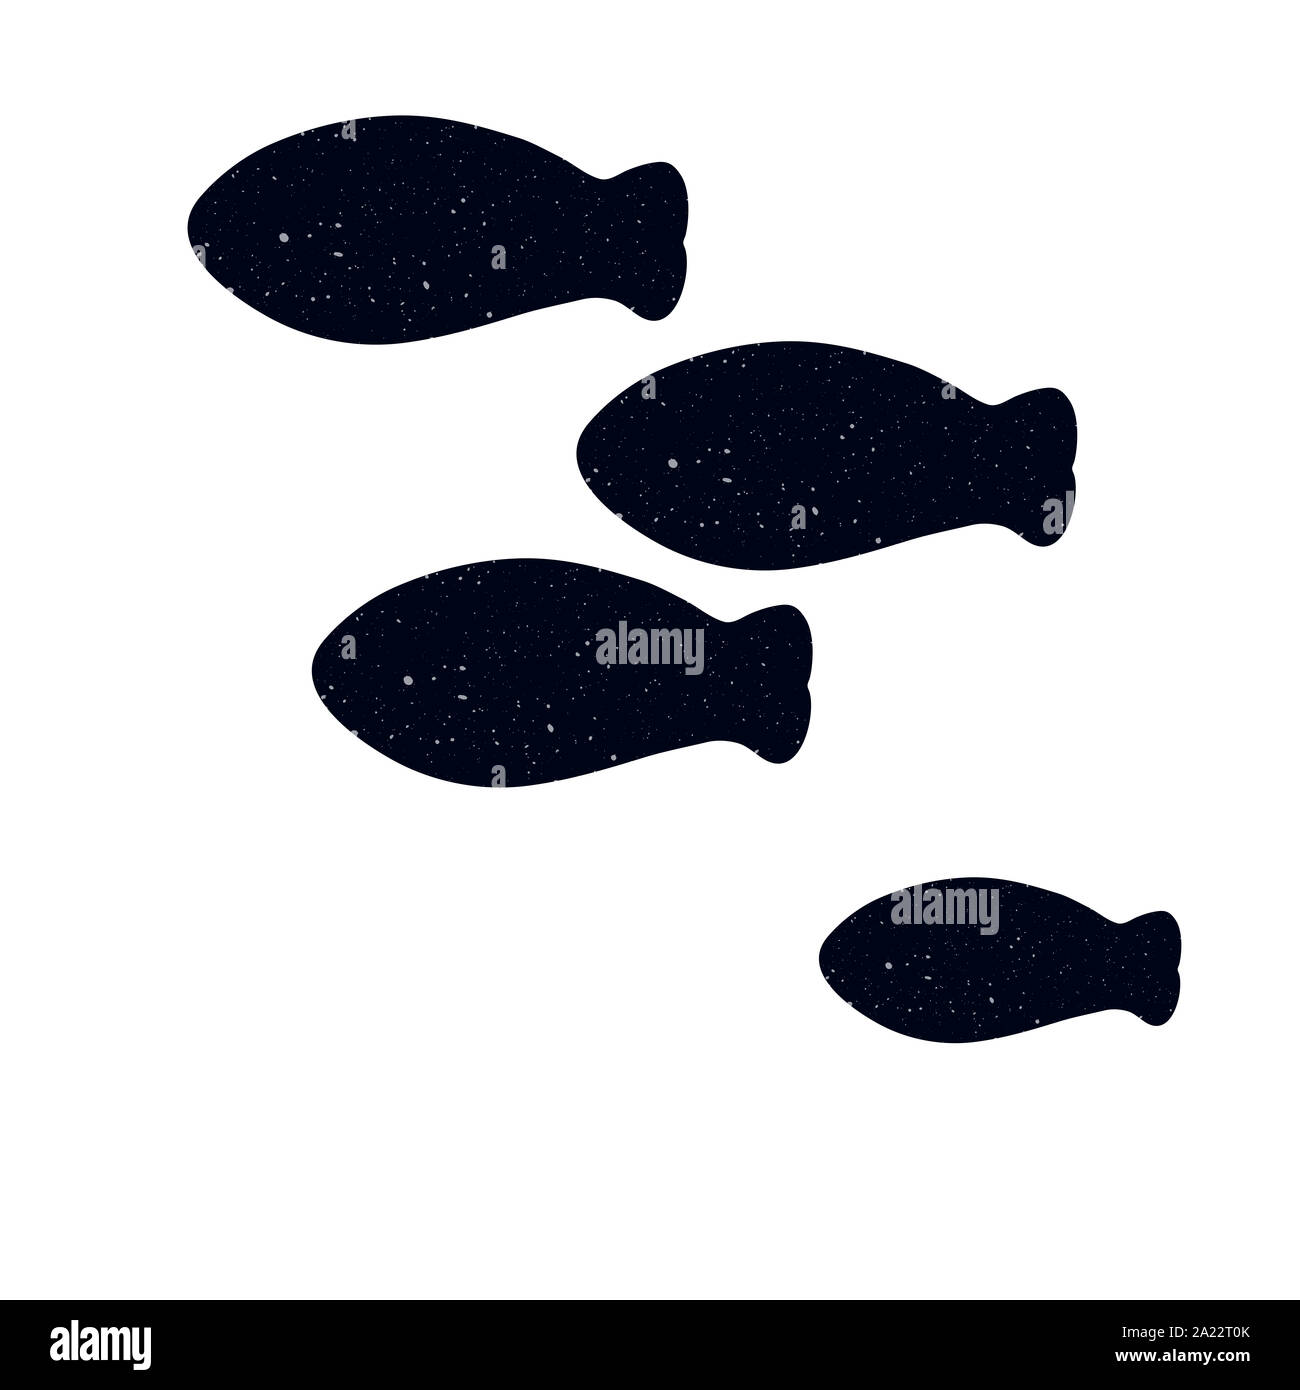 Black silhouette of fish with white texture/ illustration Stock Photo